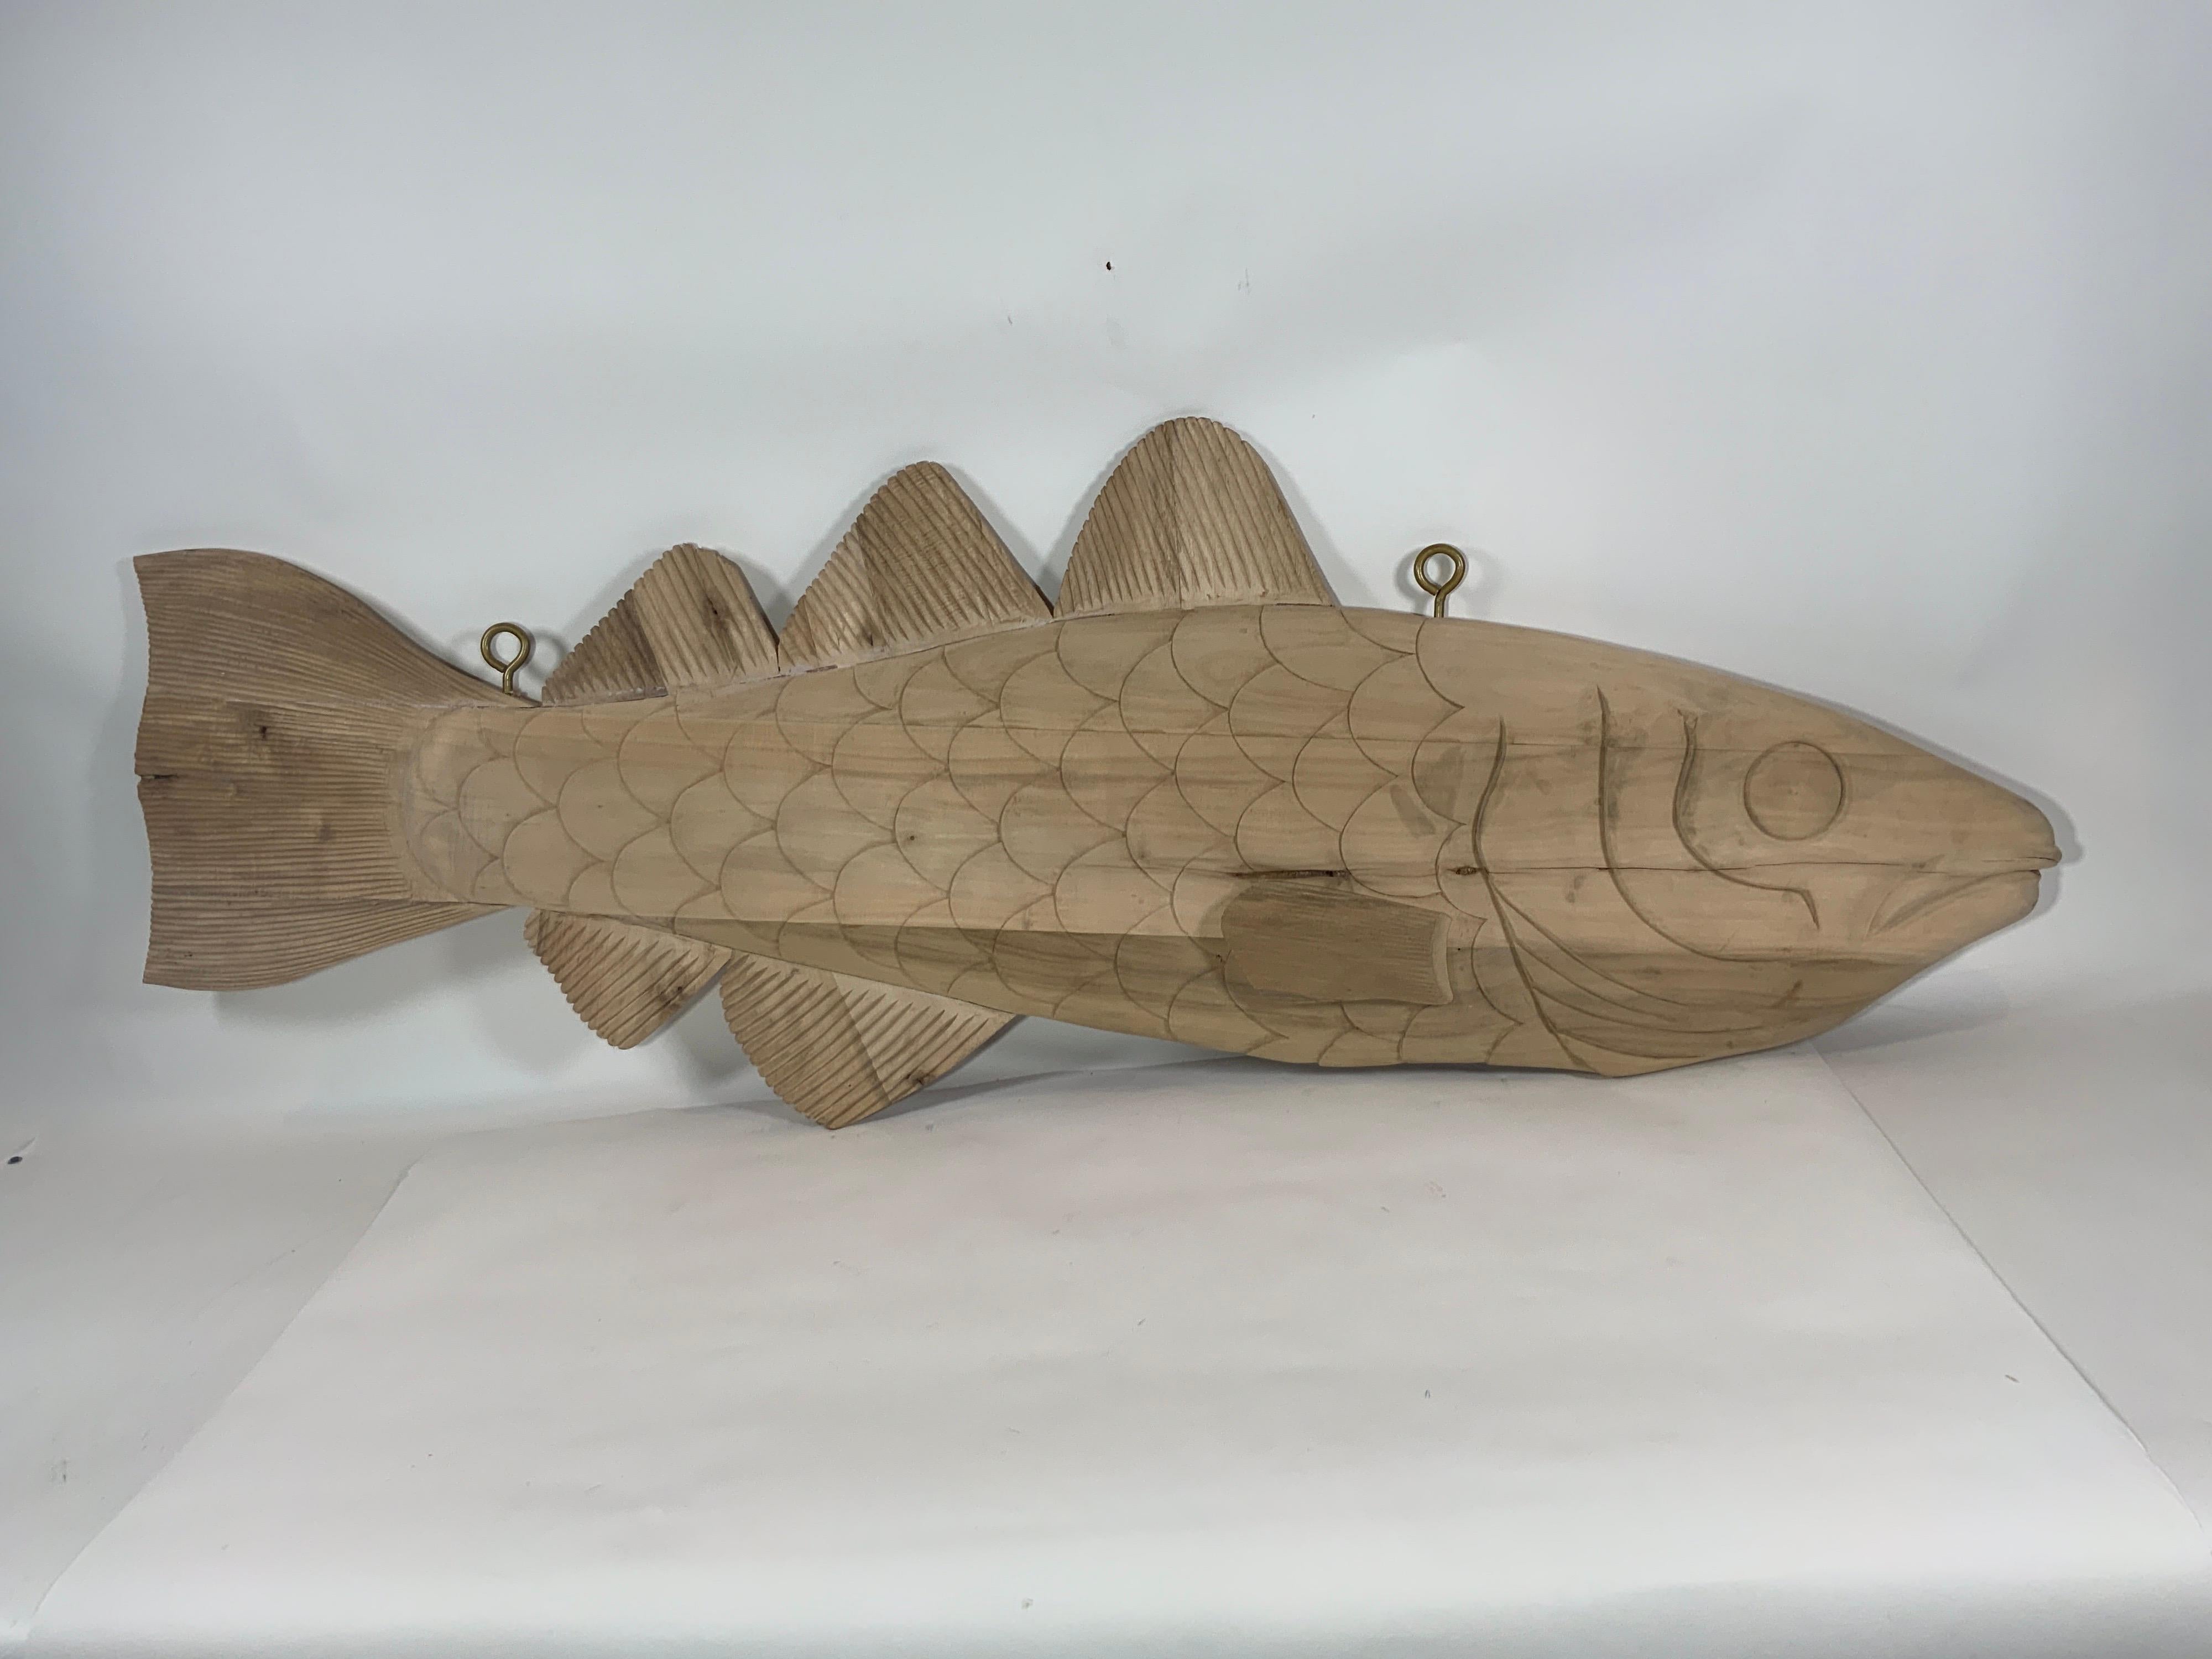 Carved wood codfish trade sign reminiscent of the signs that used to hang in the English fish terminals in the 19th century. Detailed carving with gills, fins, scales, eyes and snout. Two sided. Fitted with hanging hooks.

Overall Dimensions: